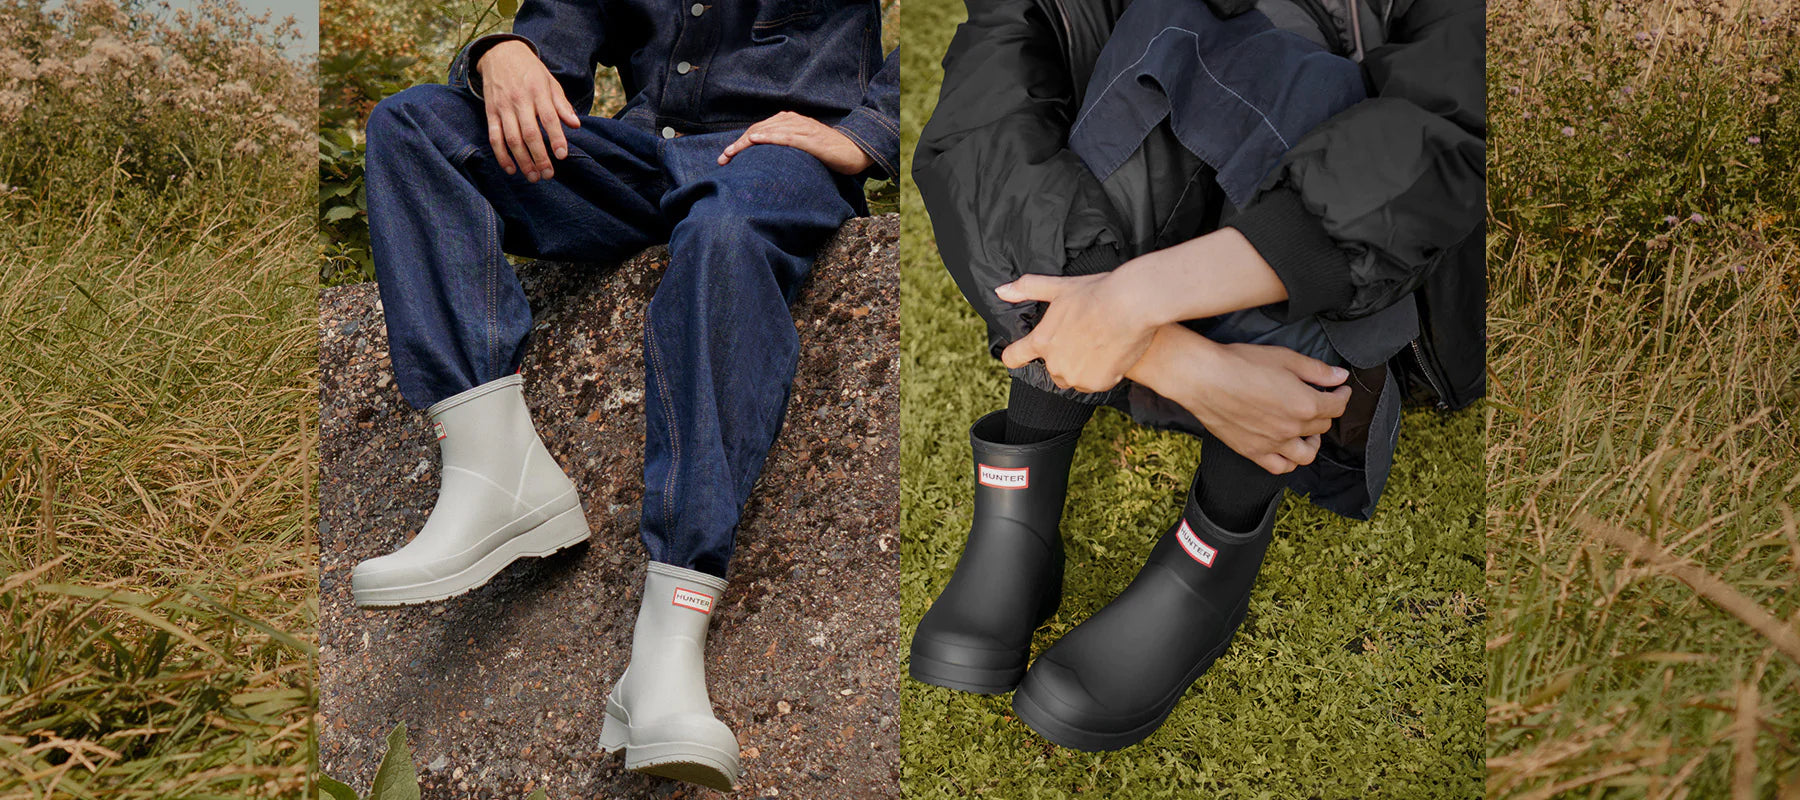 Hunter Boots Good For Winter